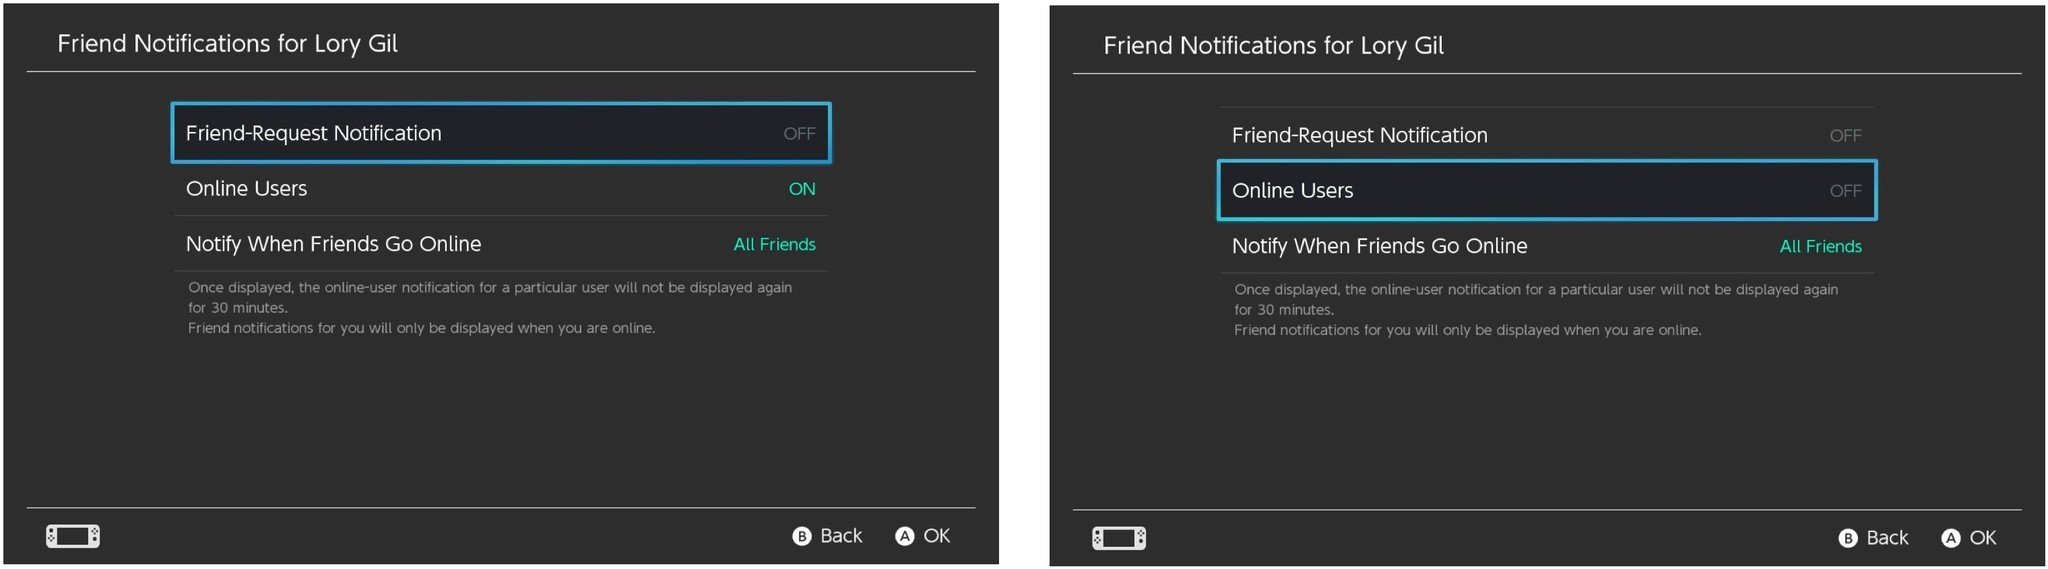 Select Friend-Request Notification, then select Online Users